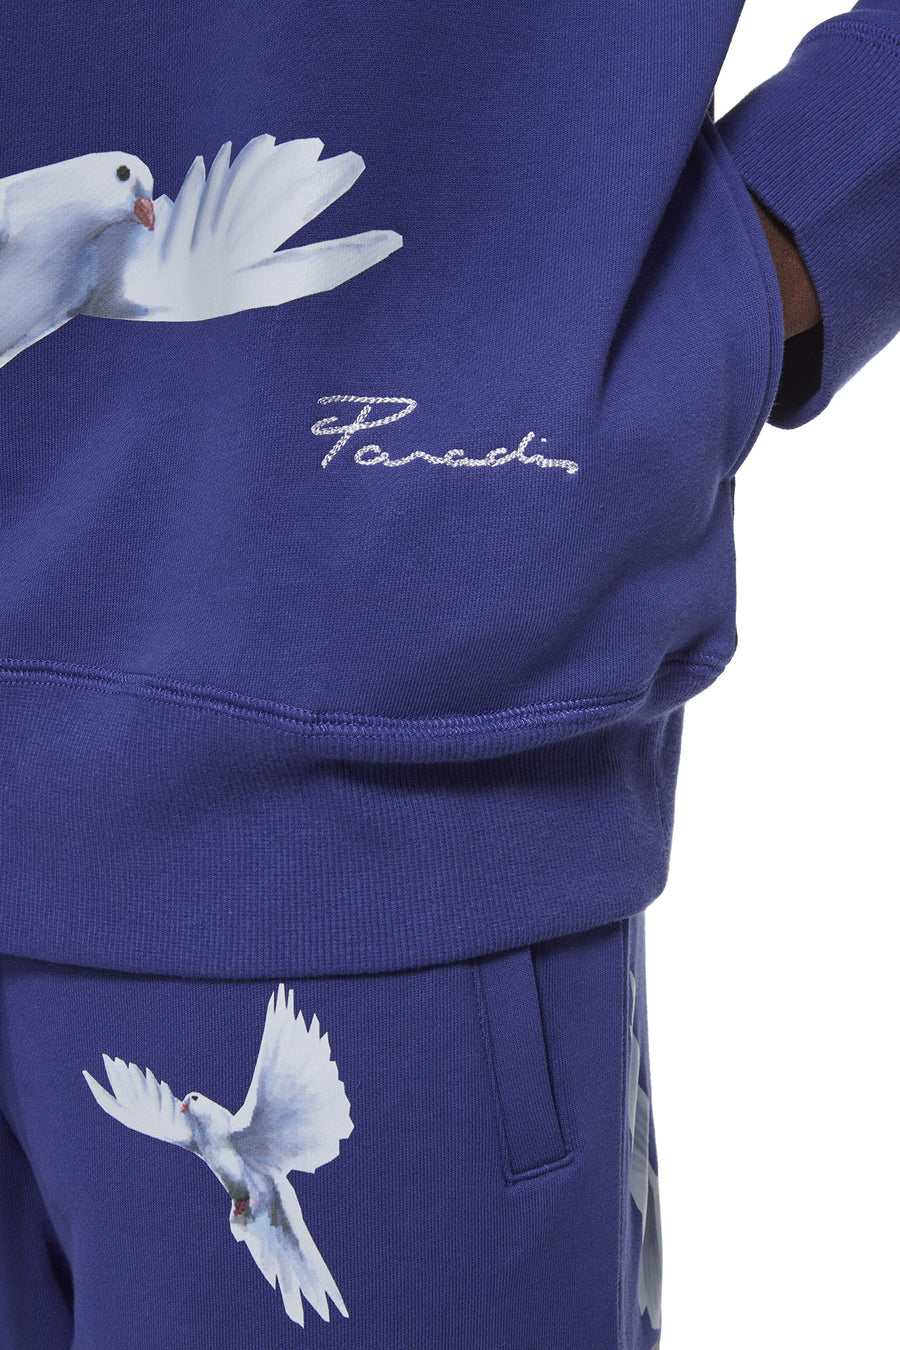 FREEDOM DOVES PERSIAN BLUE HOODED SWEATER